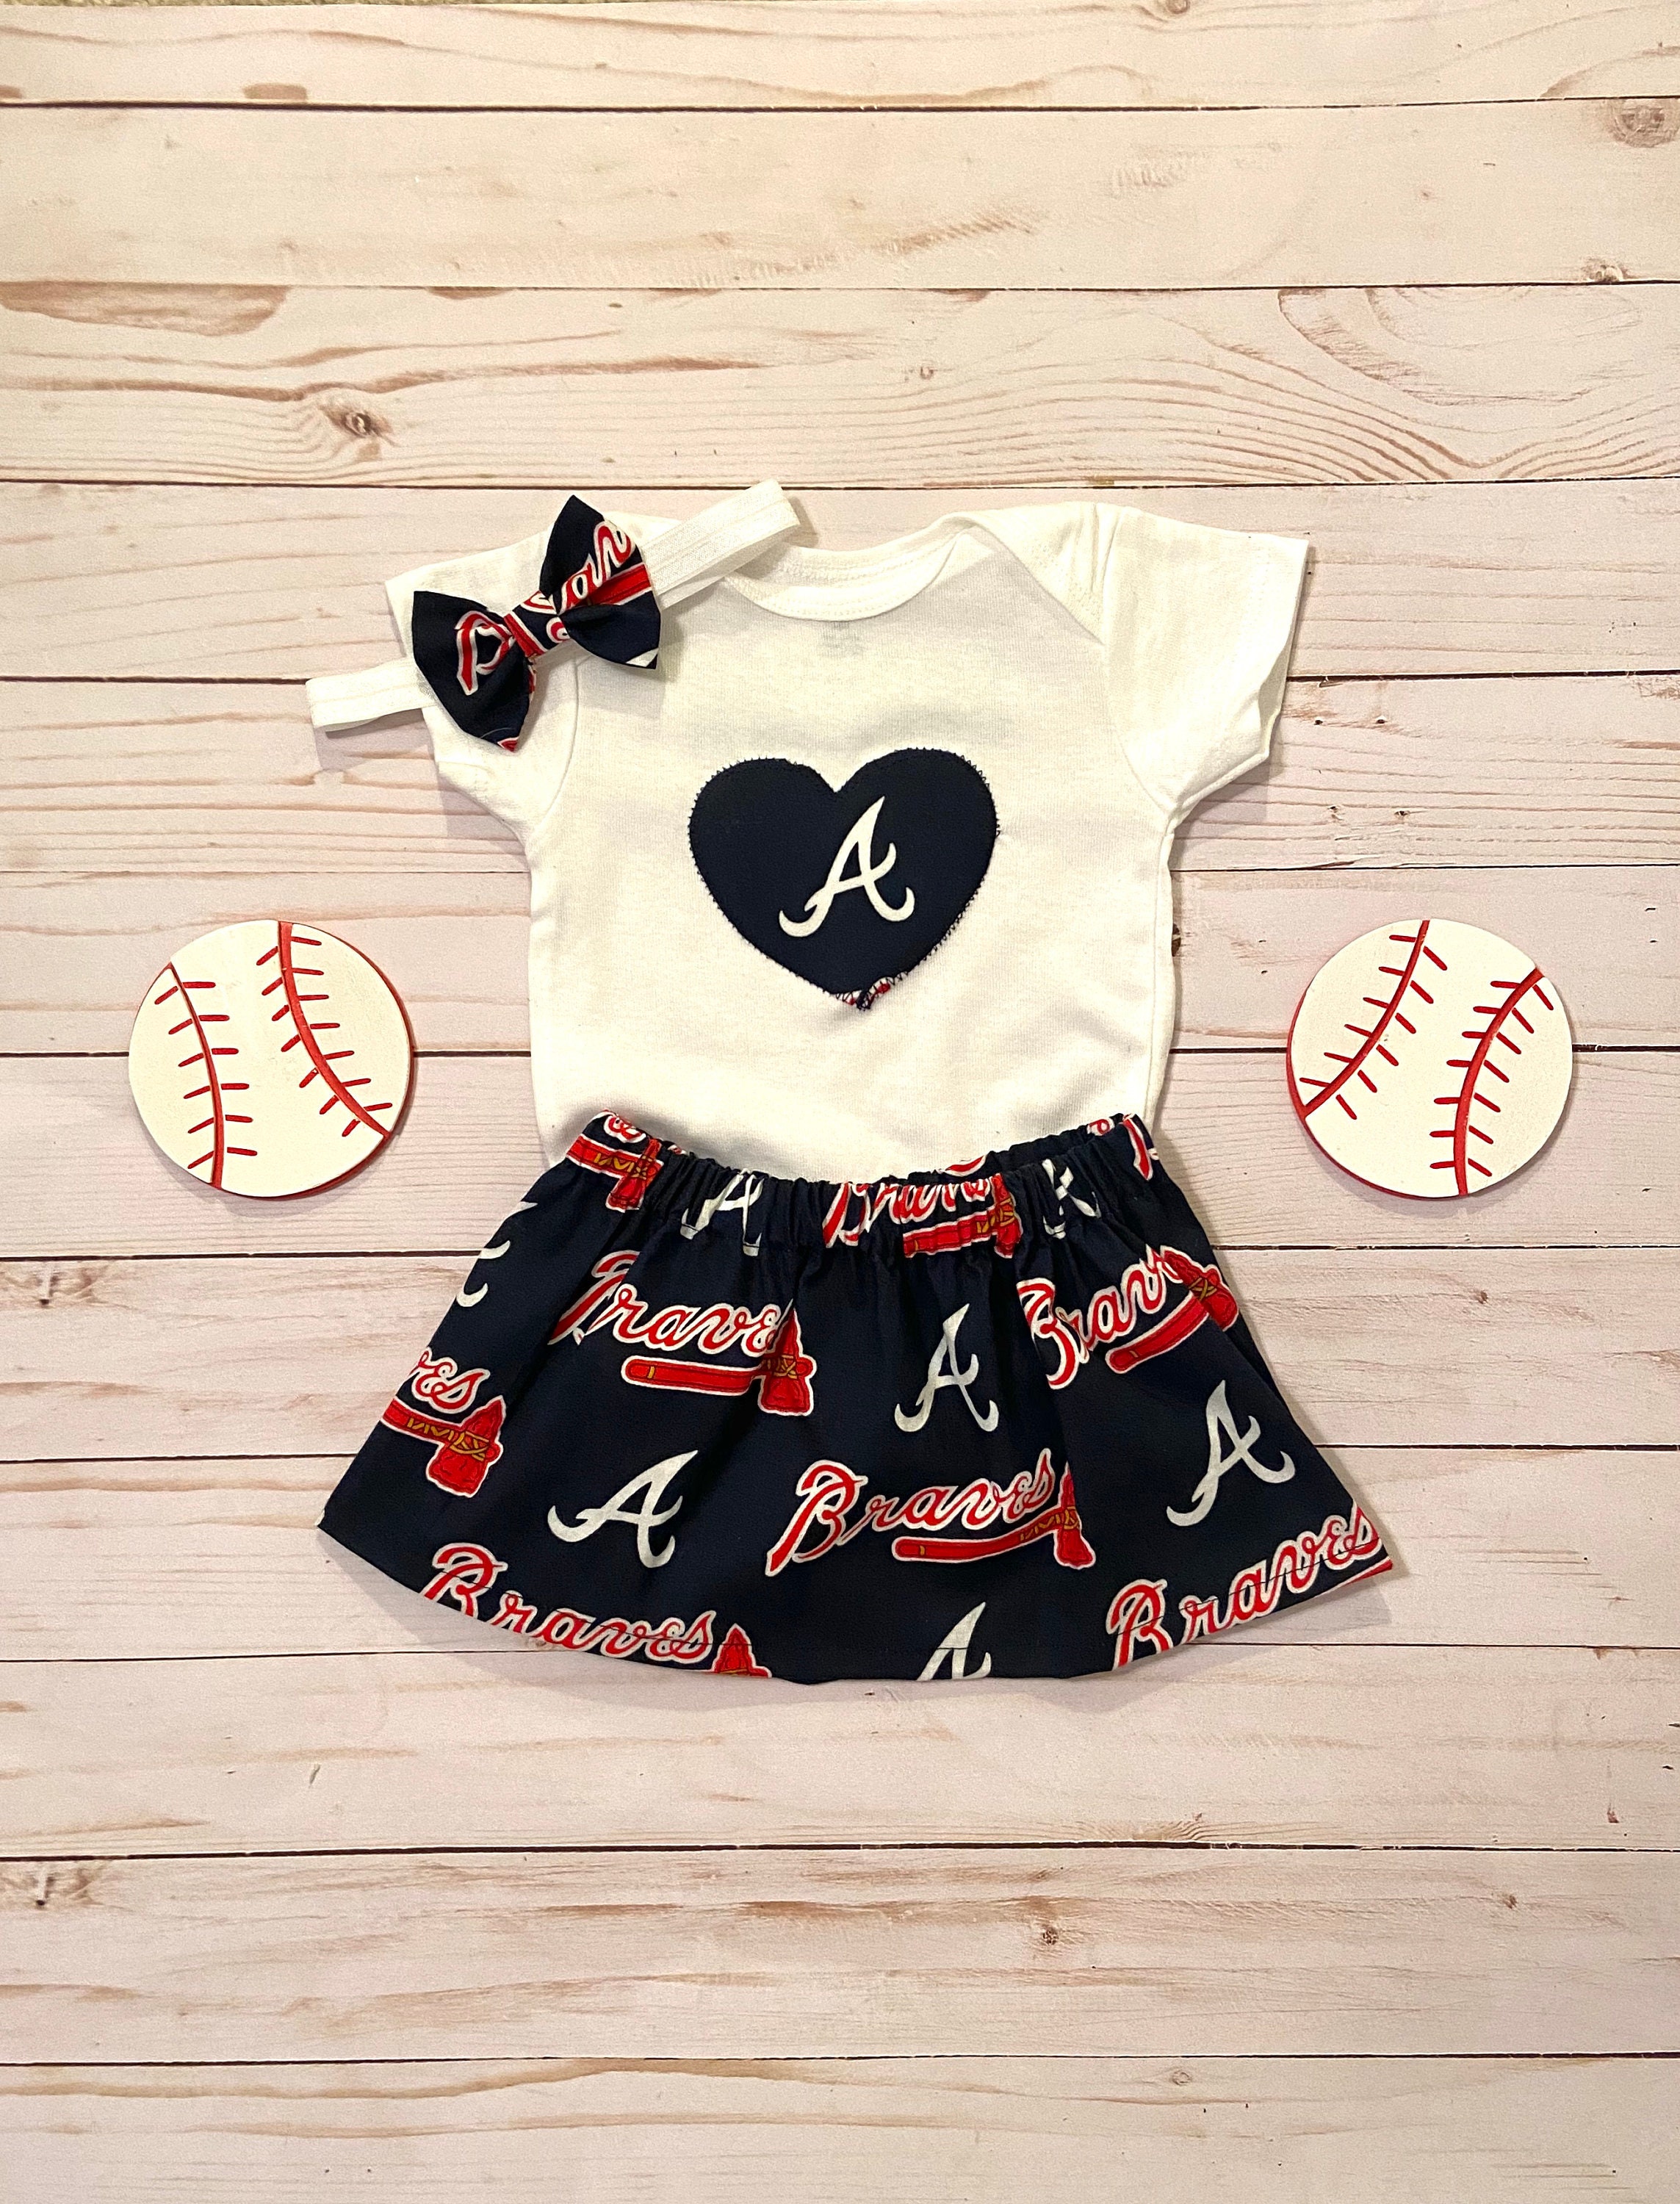 BRAVES GAME  Baseball game outfits, Baseball outfit, Baseball jersey  outfit women